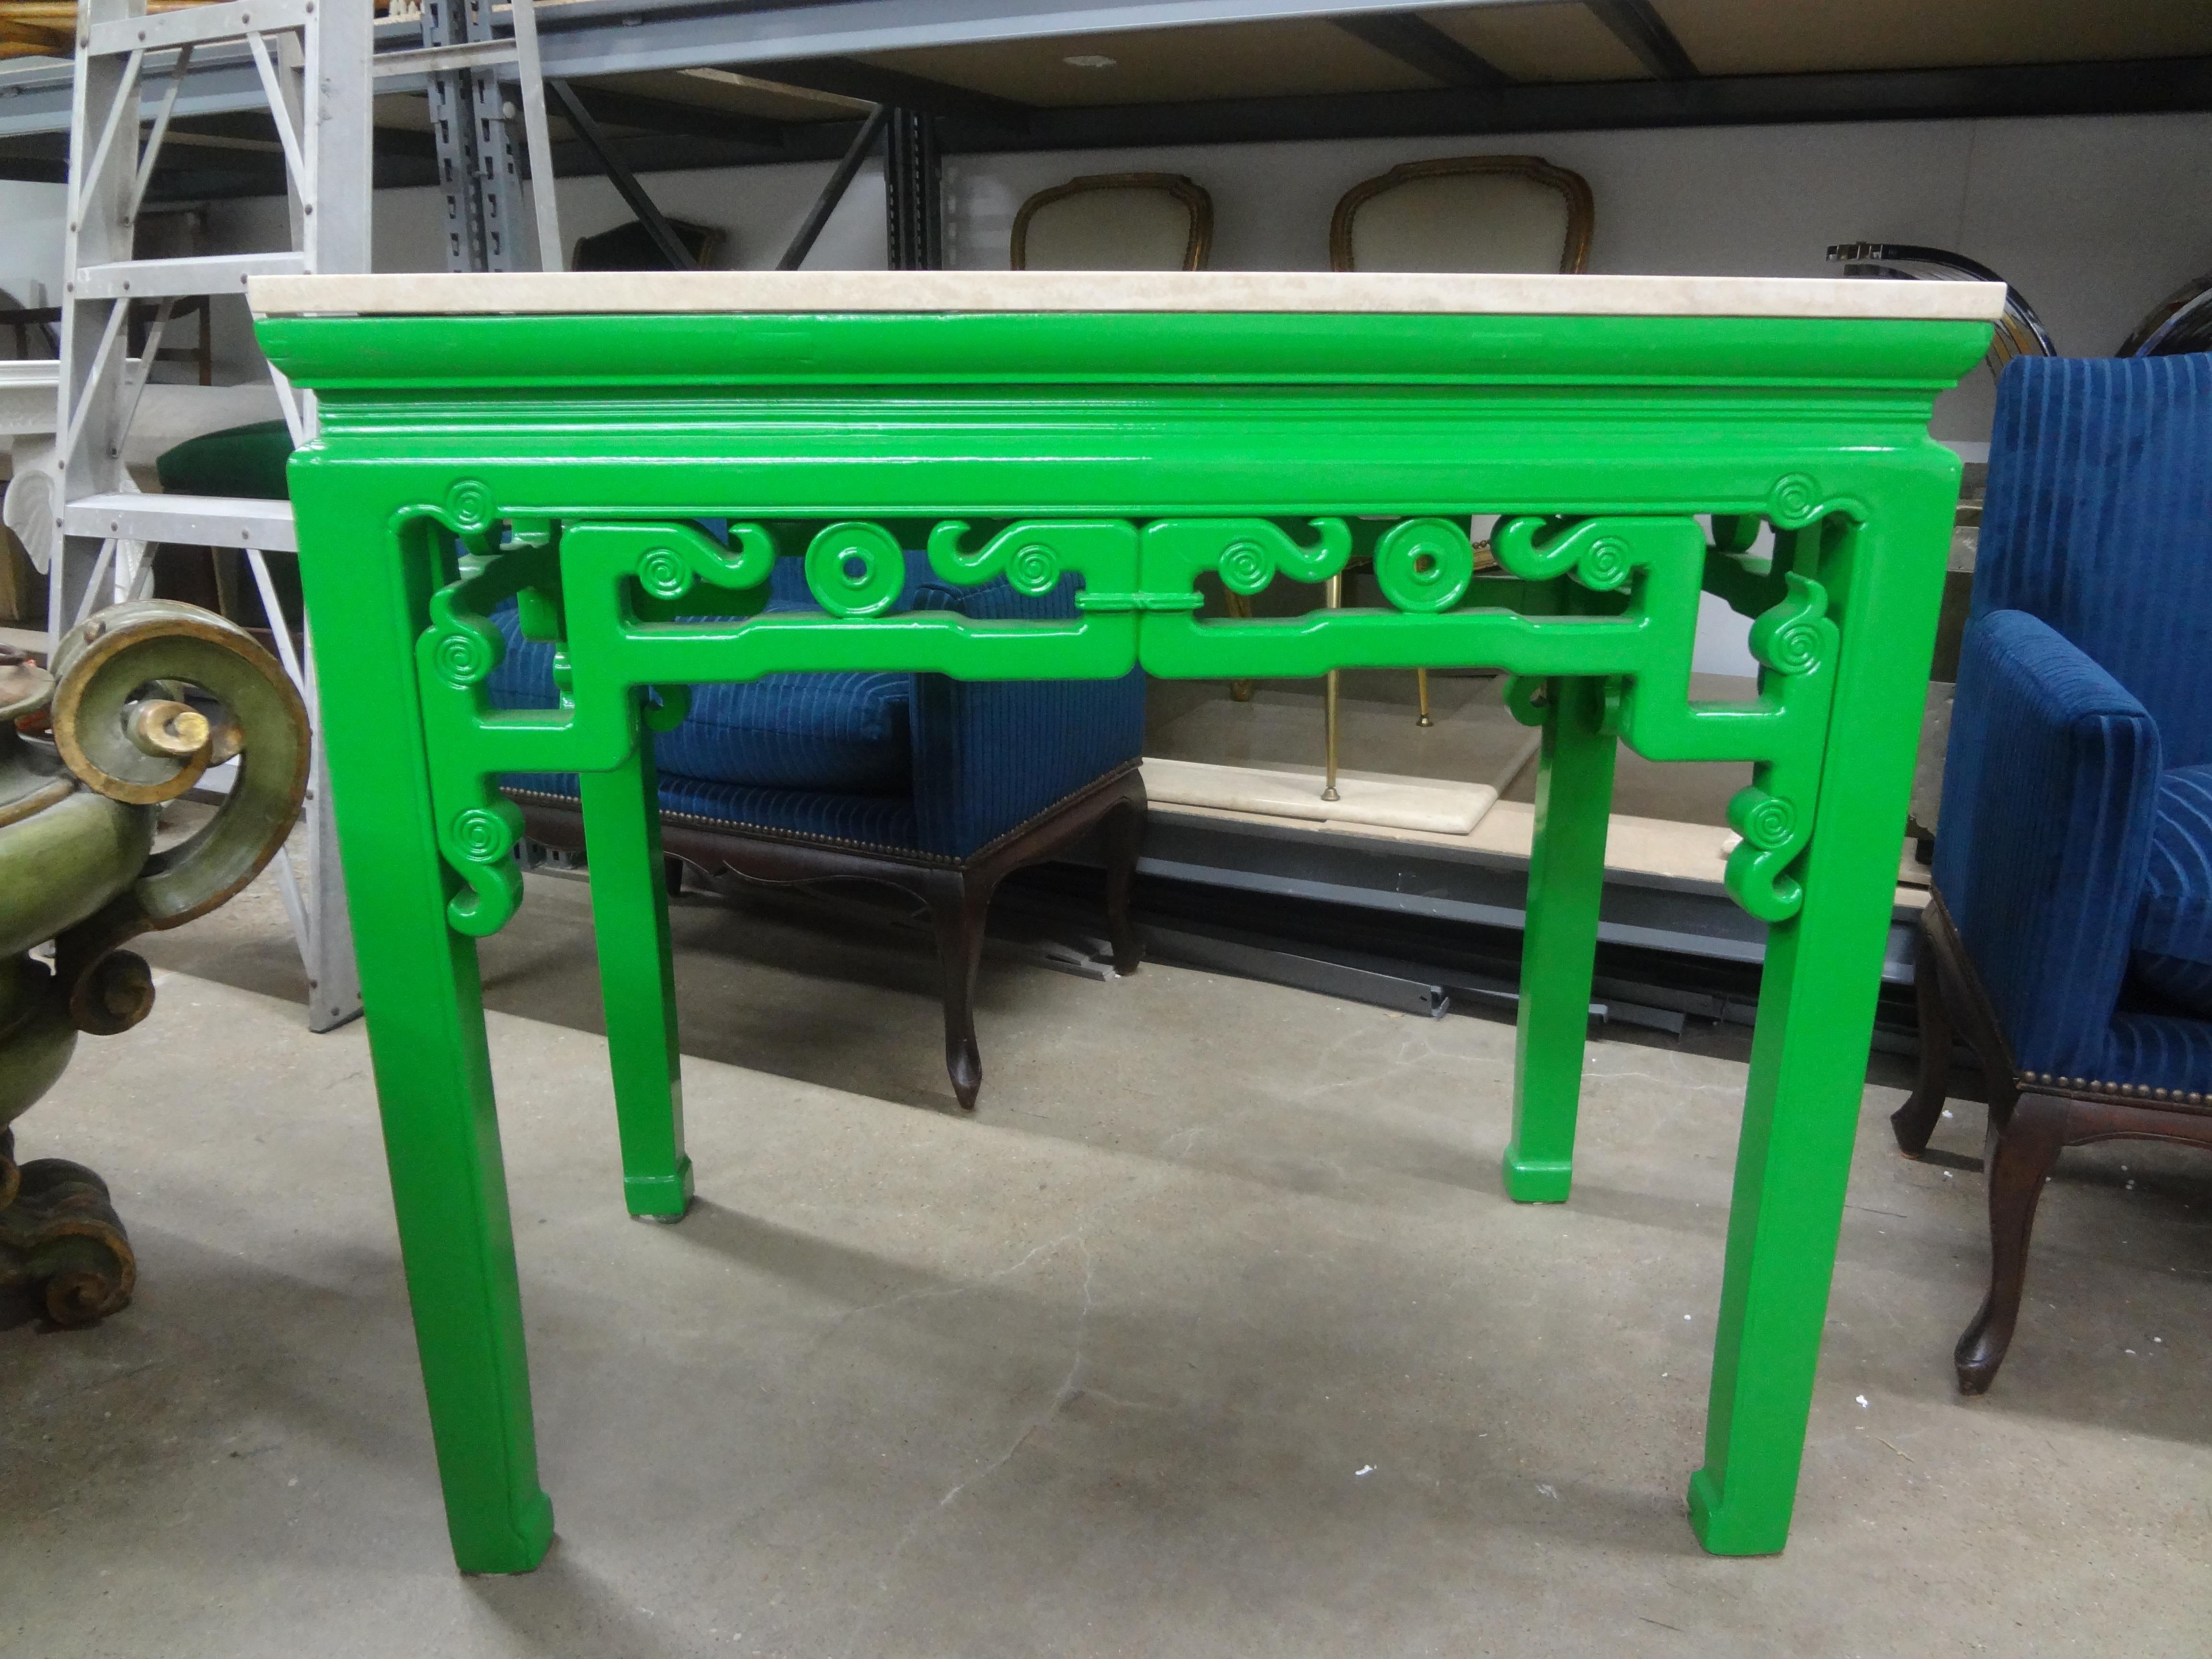 19th Century Chinese Lacquered Console With Travertine Top.
This stunning 19th century Chinese chinoiserie style free standing console table has
been lacquered in a beautiful shade of green with a new honed travertine top.
This is a statement